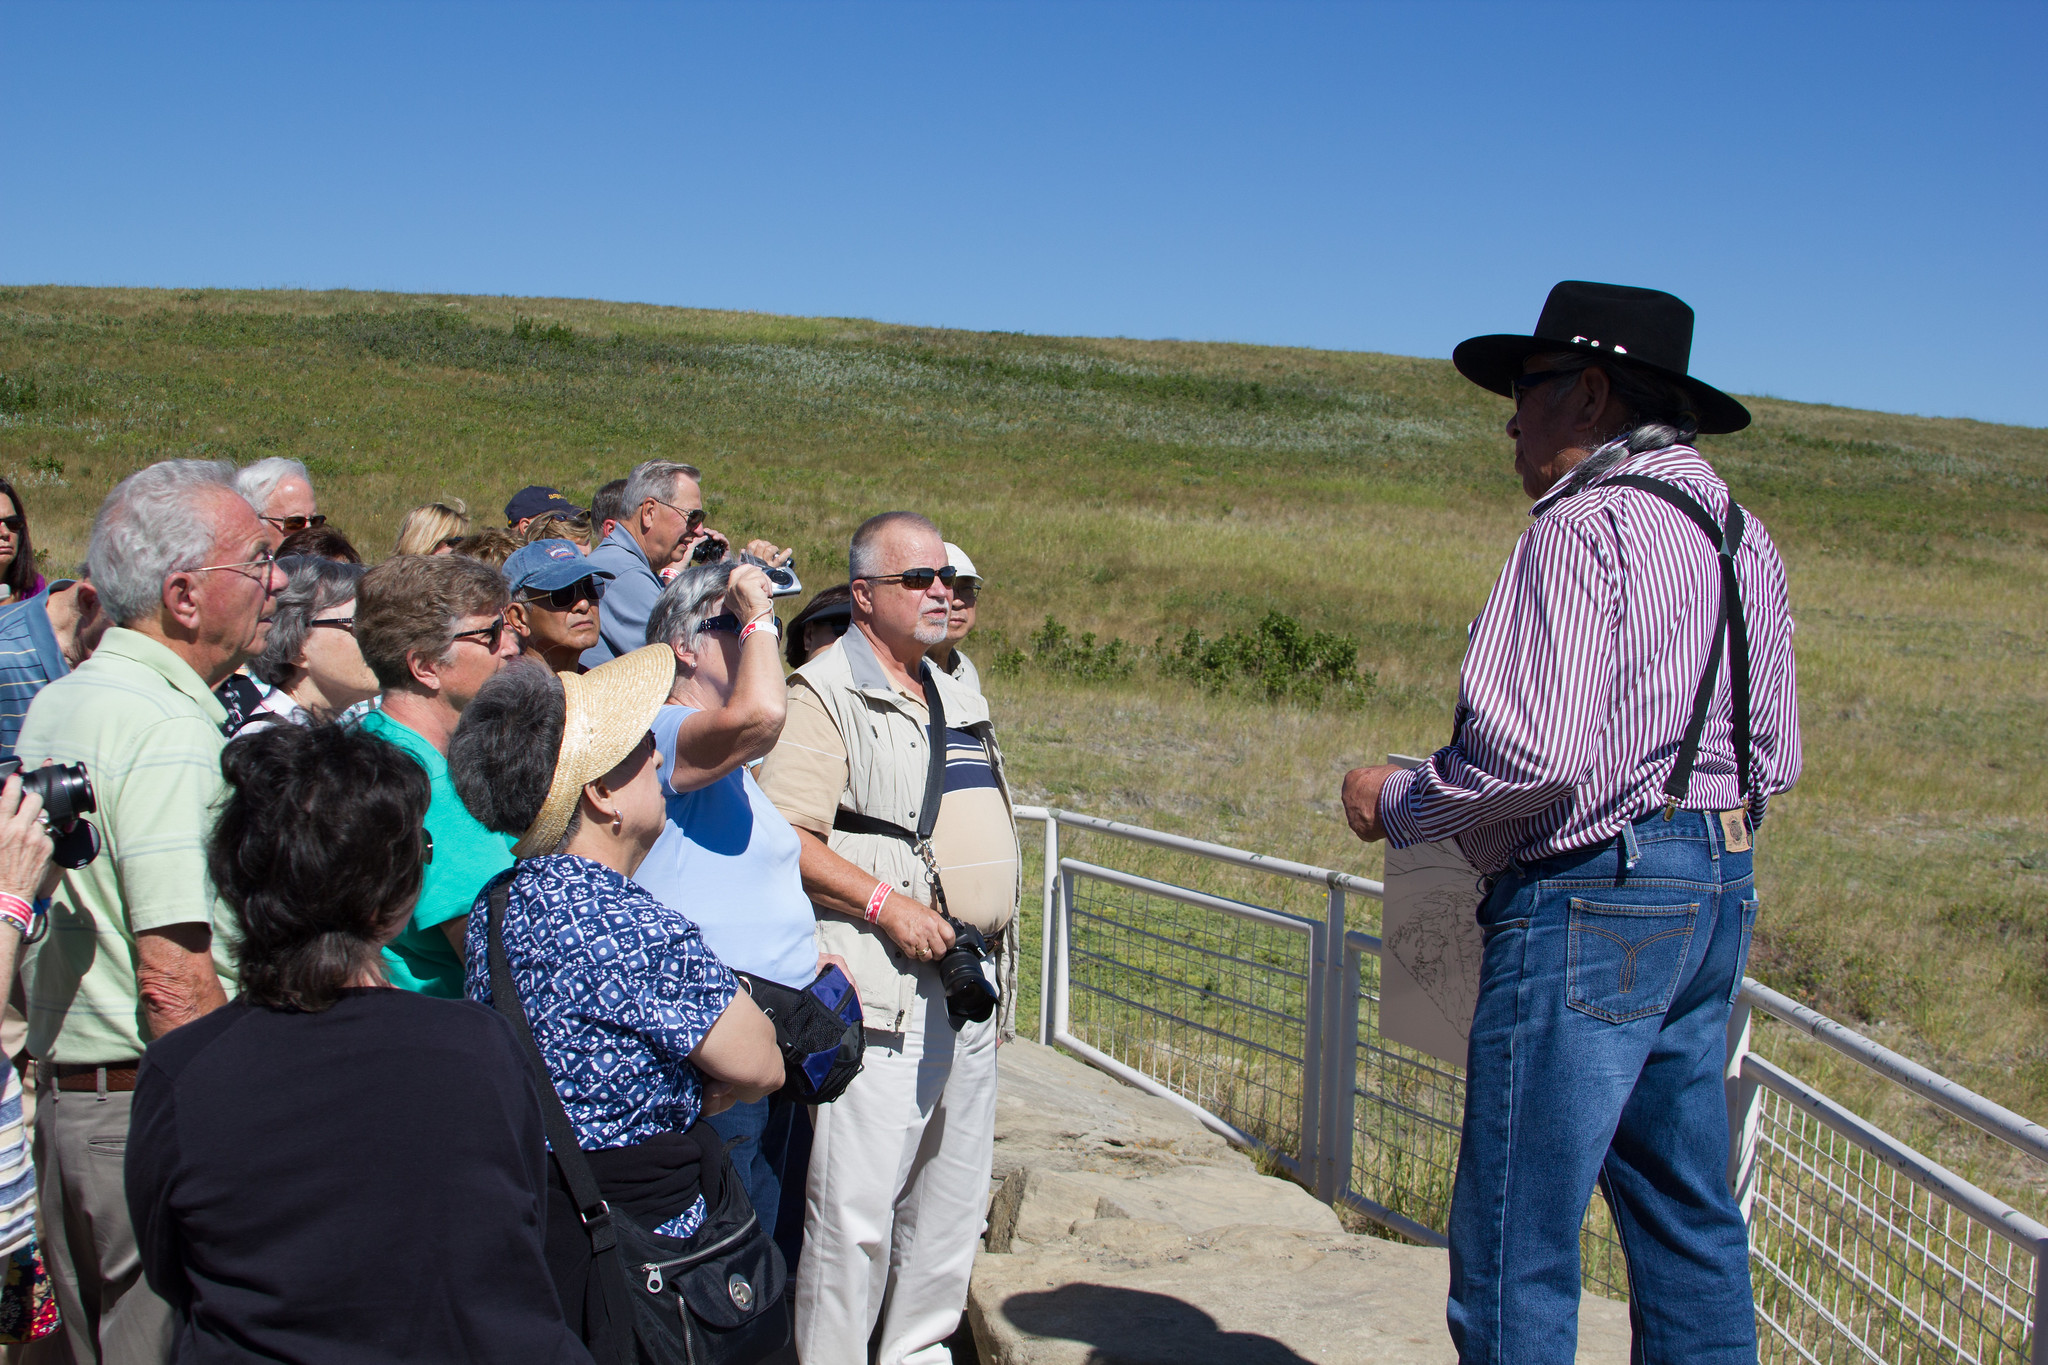 Tourists gather around a man wearing a cowboy hat next to a short metal fence in front of a plain.